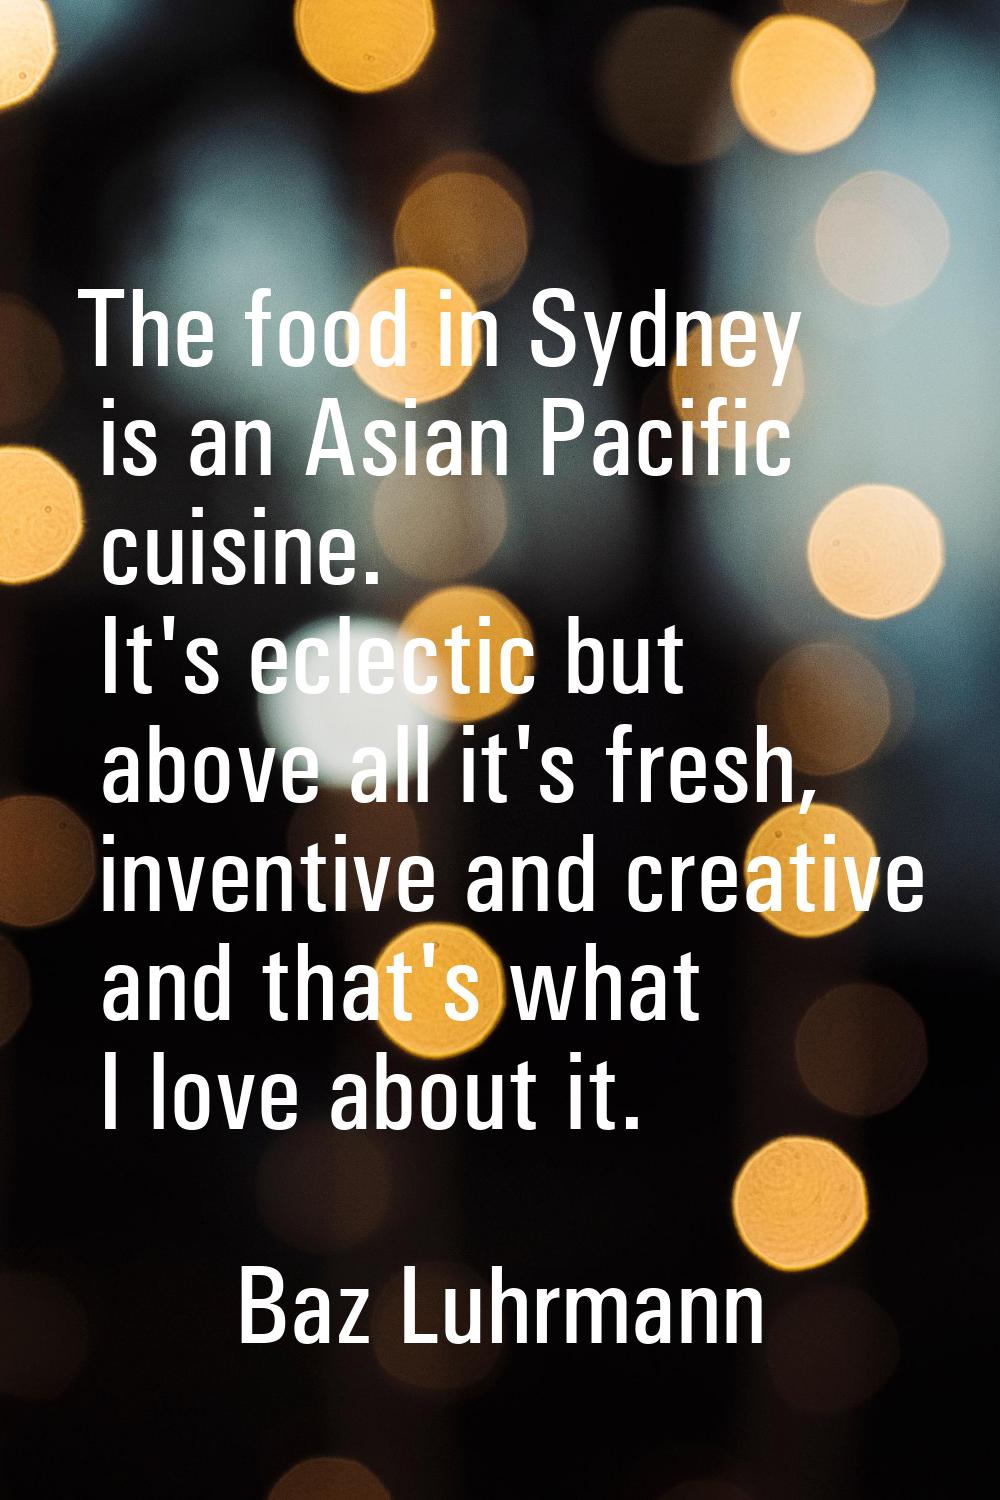 The food in Sydney is an Asian Pacific cuisine. It's eclectic but above all it's fresh, inventive a